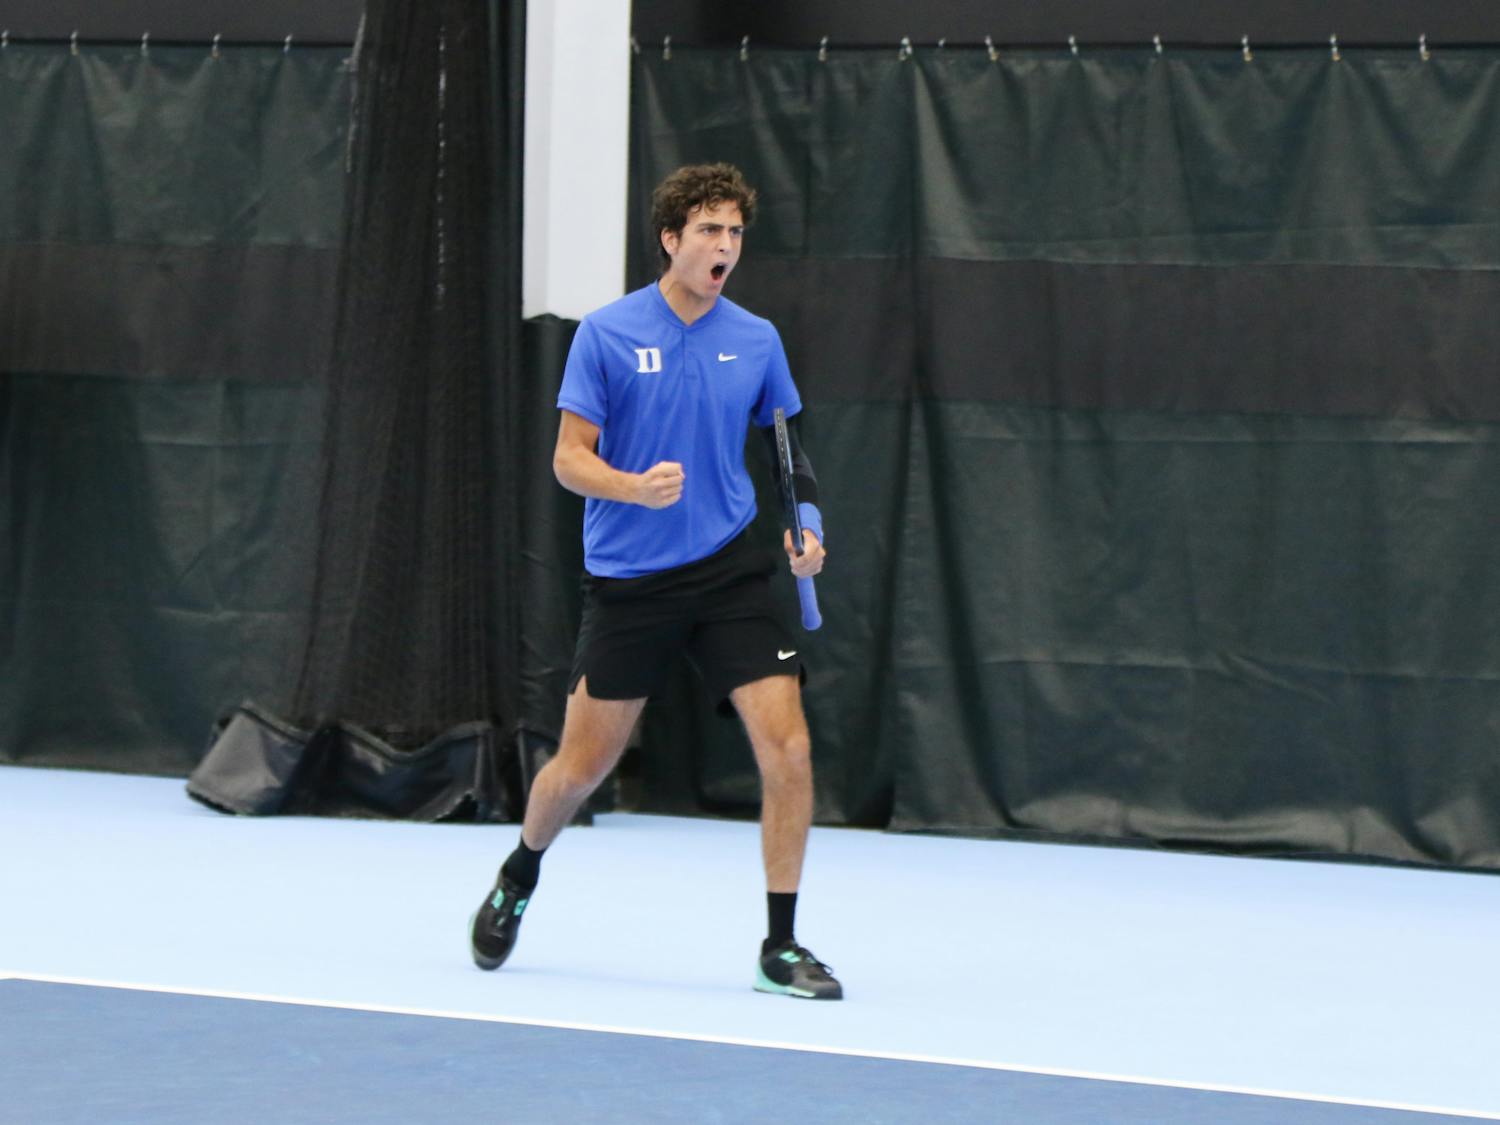 Pedro Rodenas, who helped Duke win the doubles point, retired during his singles match.